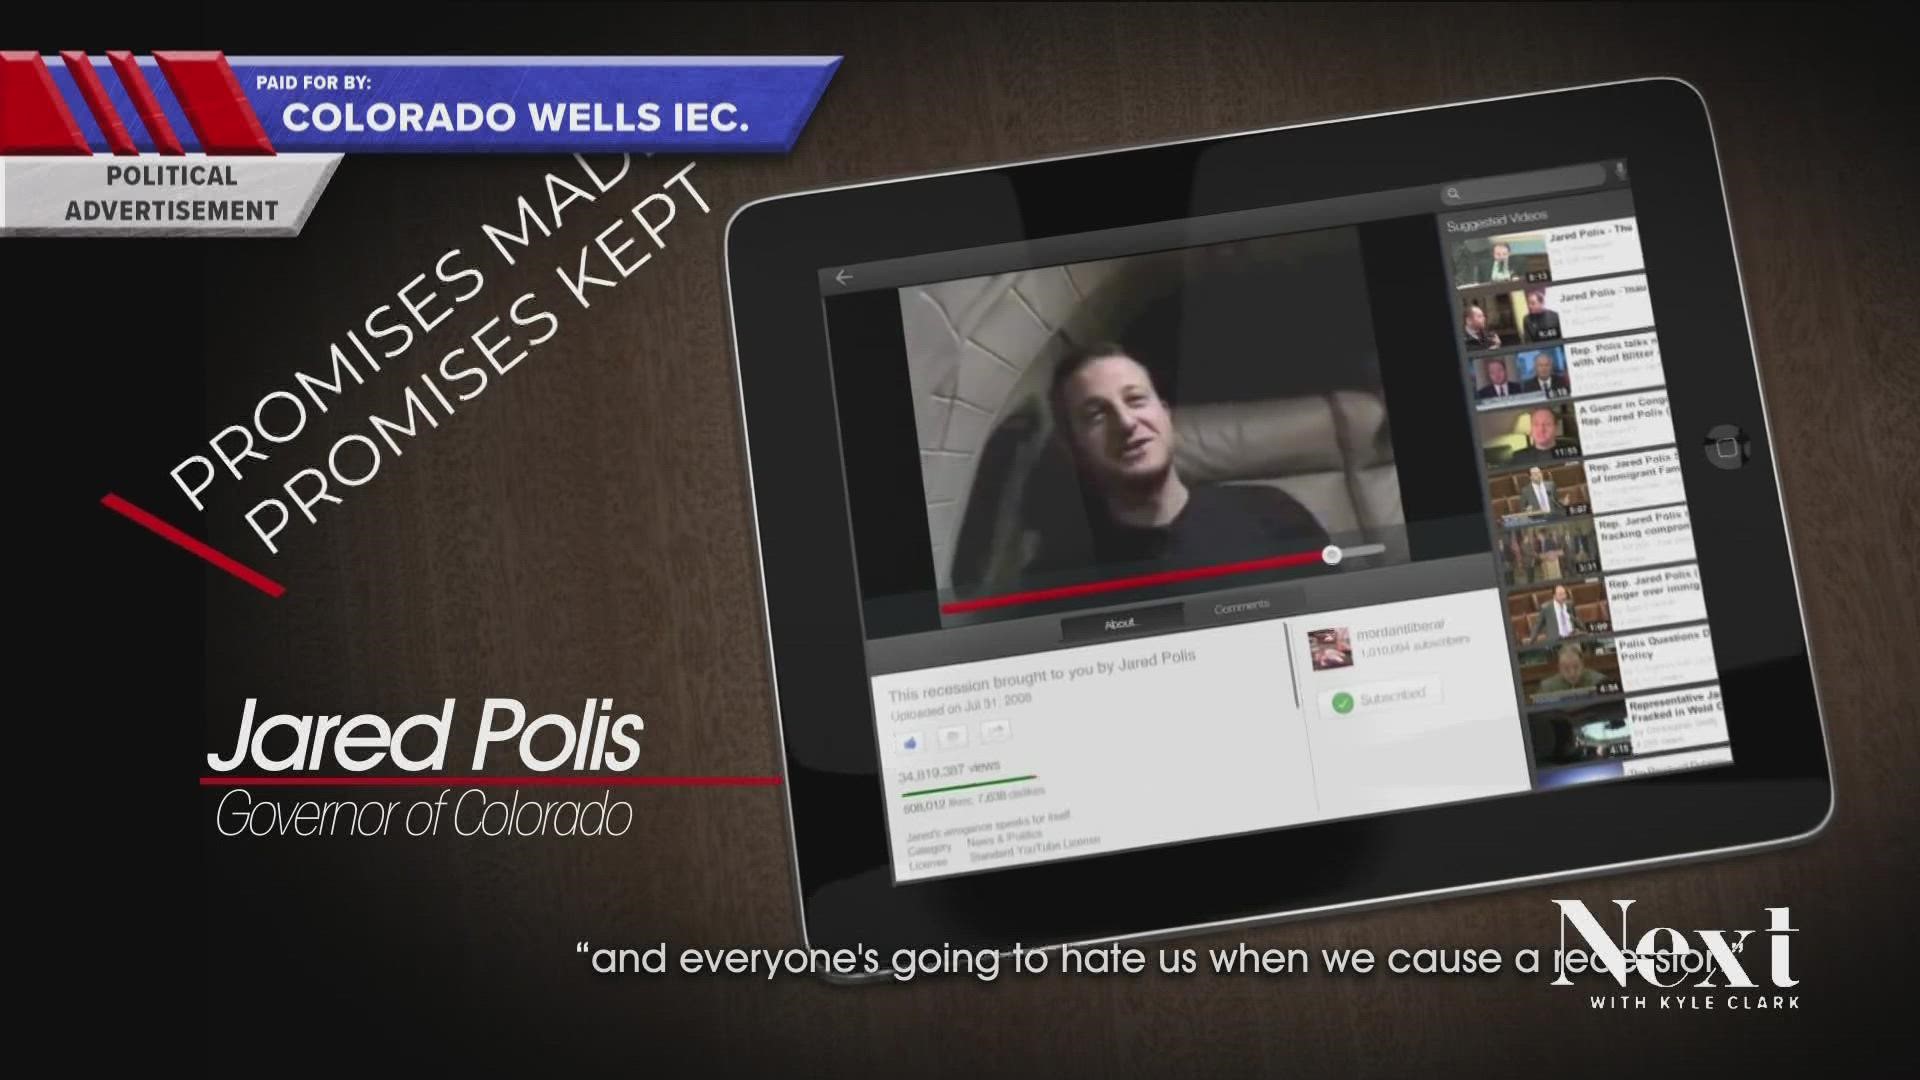 We truth-tested an anti-Polis ad made by Ganahl backer Deep Colorado Wells using an iconic scene from the Anchorman.